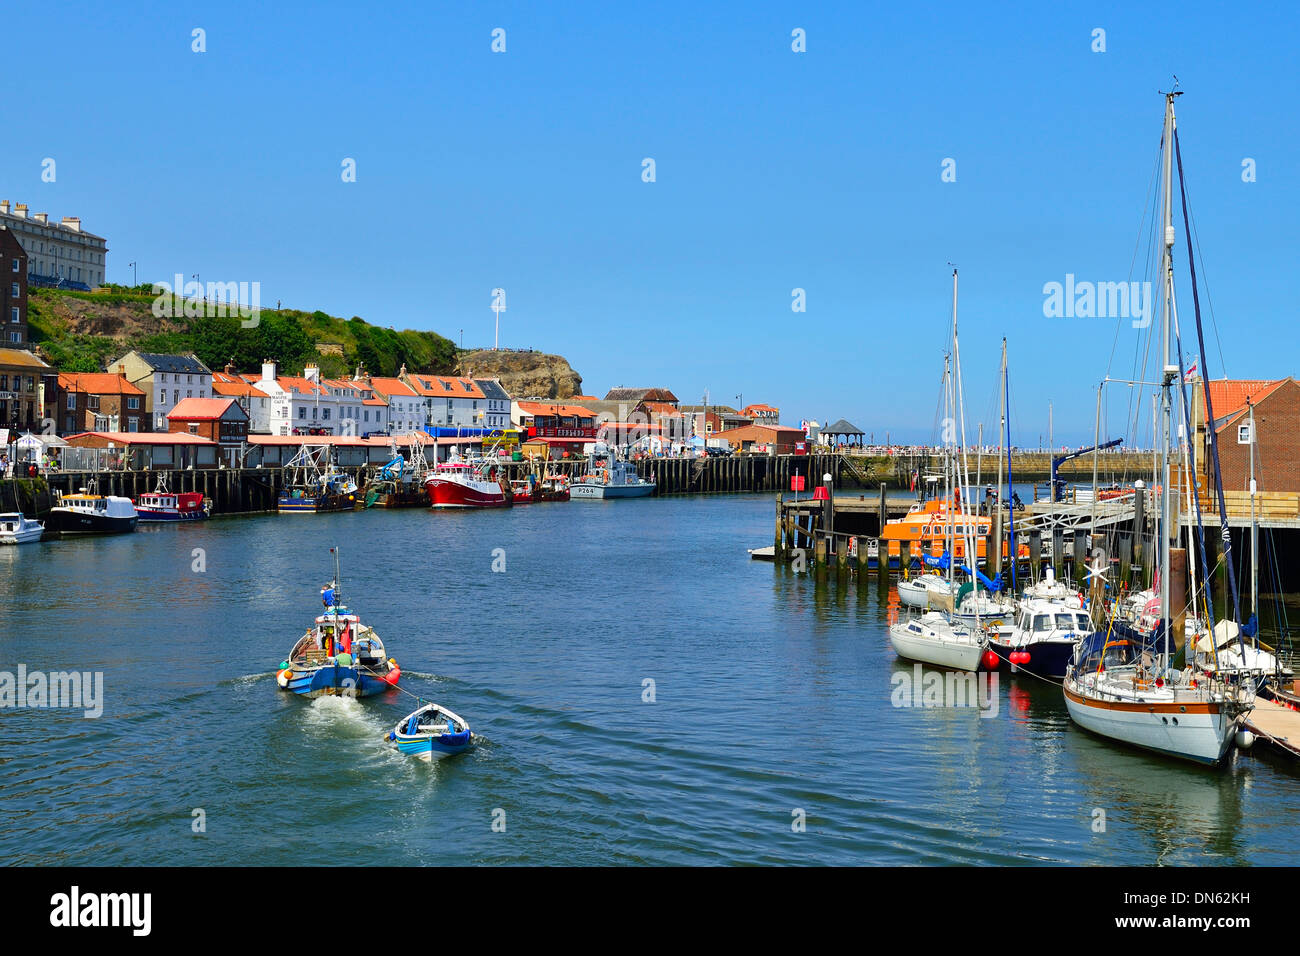 A fishing boat leaving the harbour, Whitby, North Yorkshire, England, United Kingdom Stock Photo